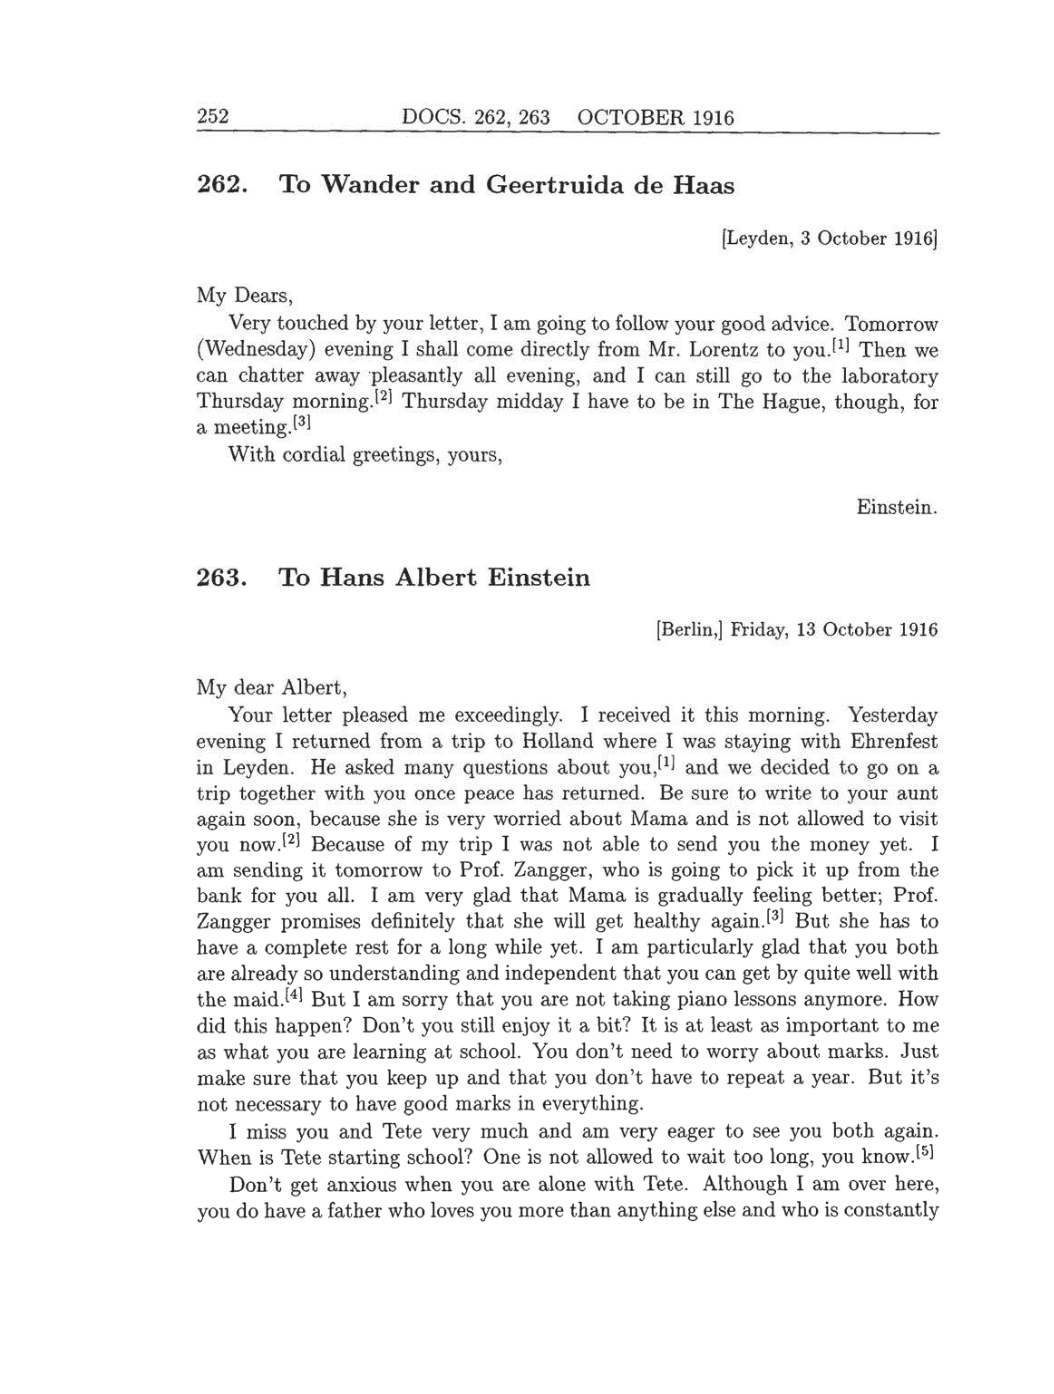 Volume 8: The Berlin Years: Correspondence, 1914-1918 (English translation supplement) page 252